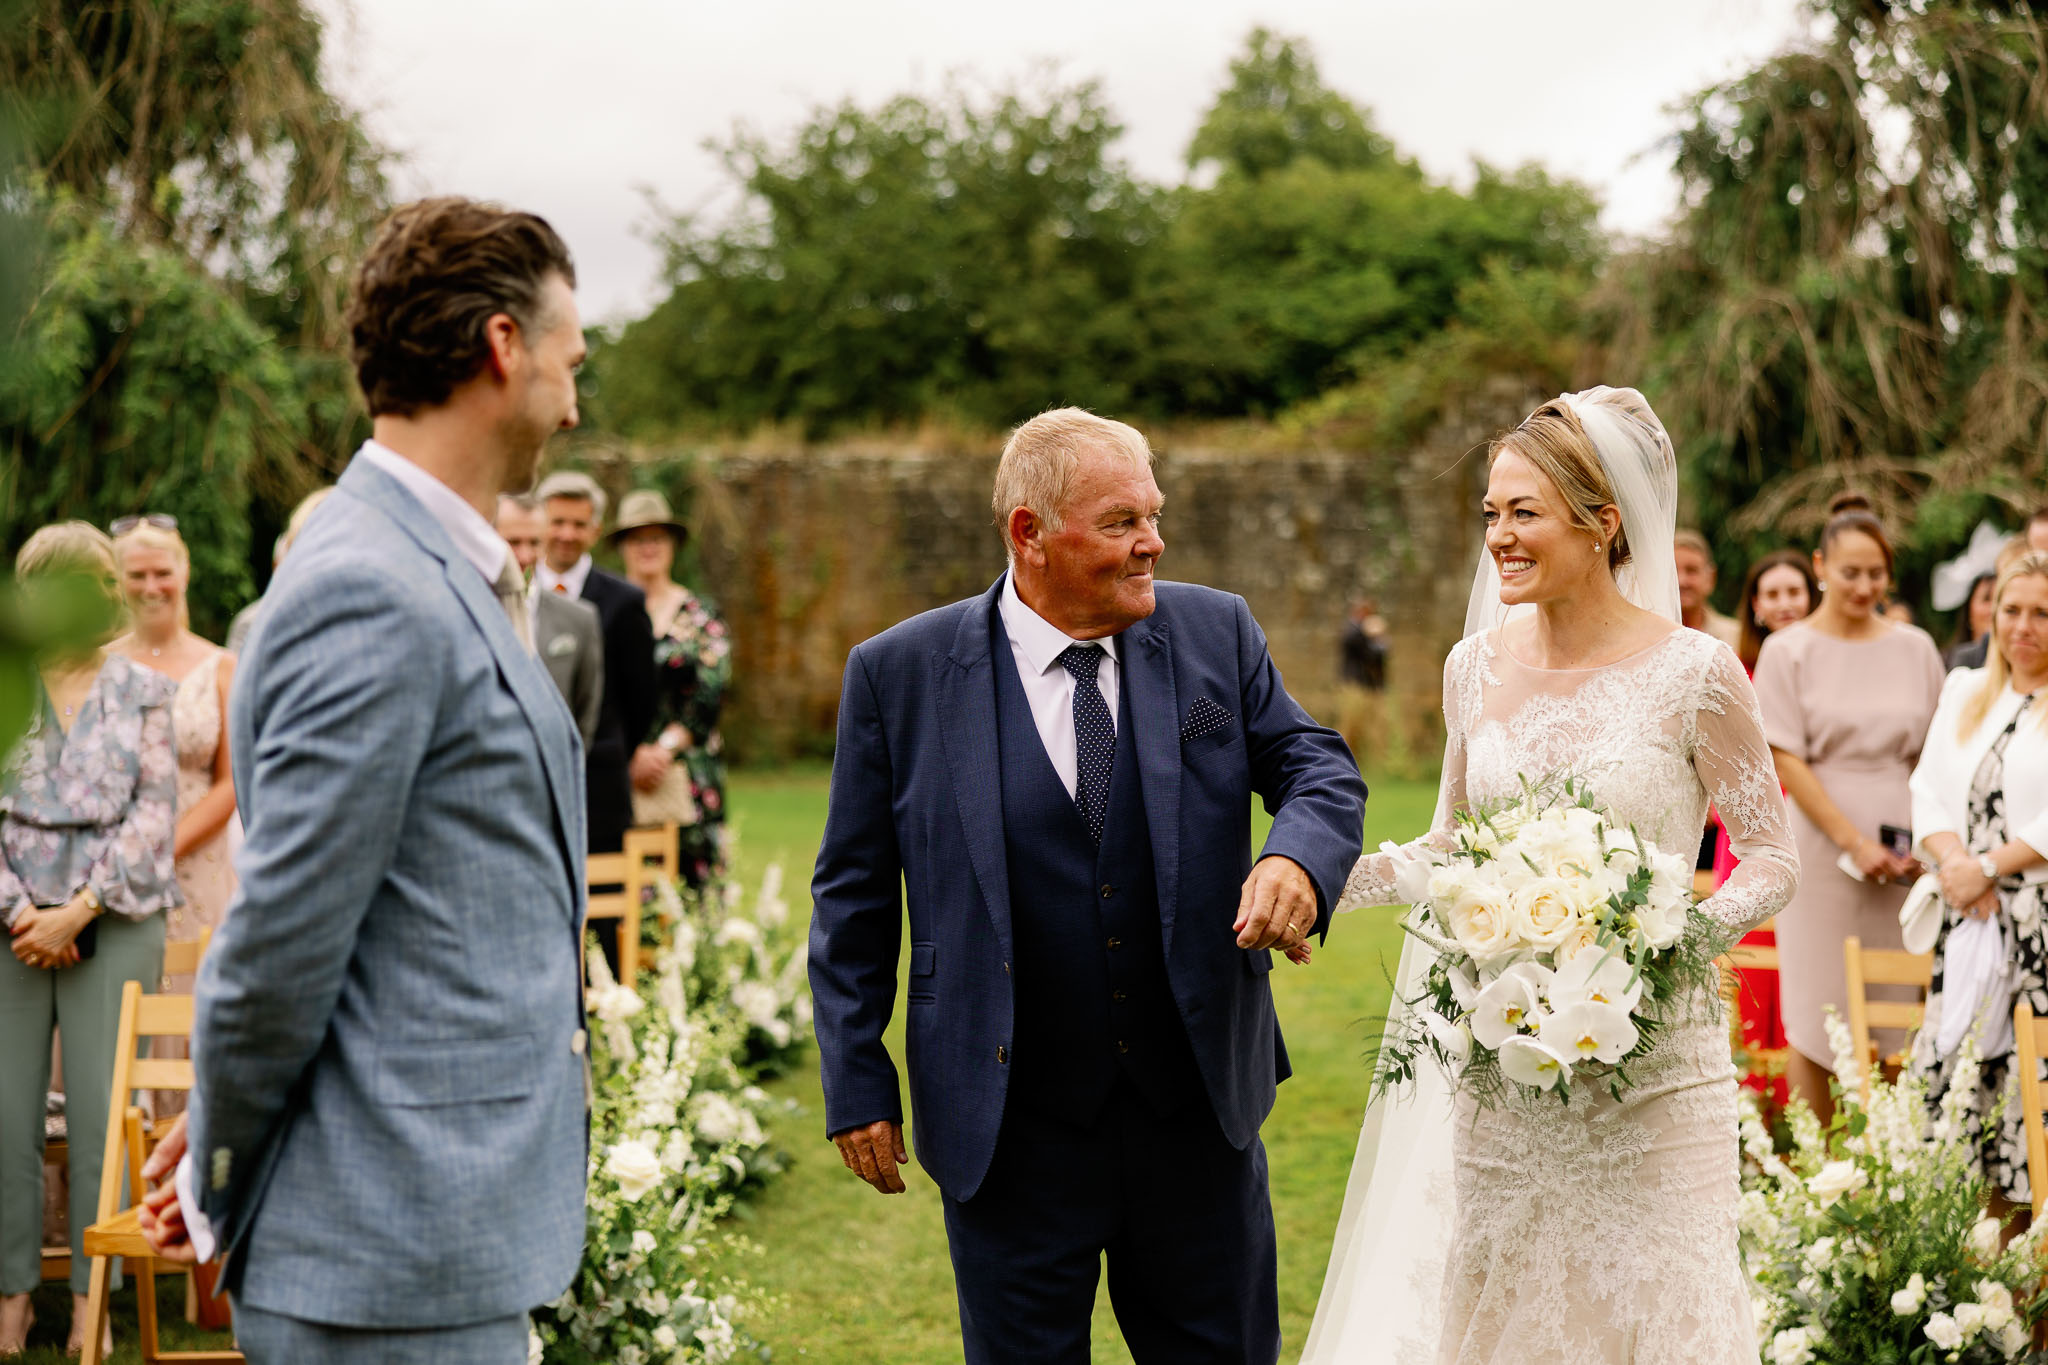 Outdoor Wedding Ceremony and Wills Marquee Reception at Jervaulx Abbey